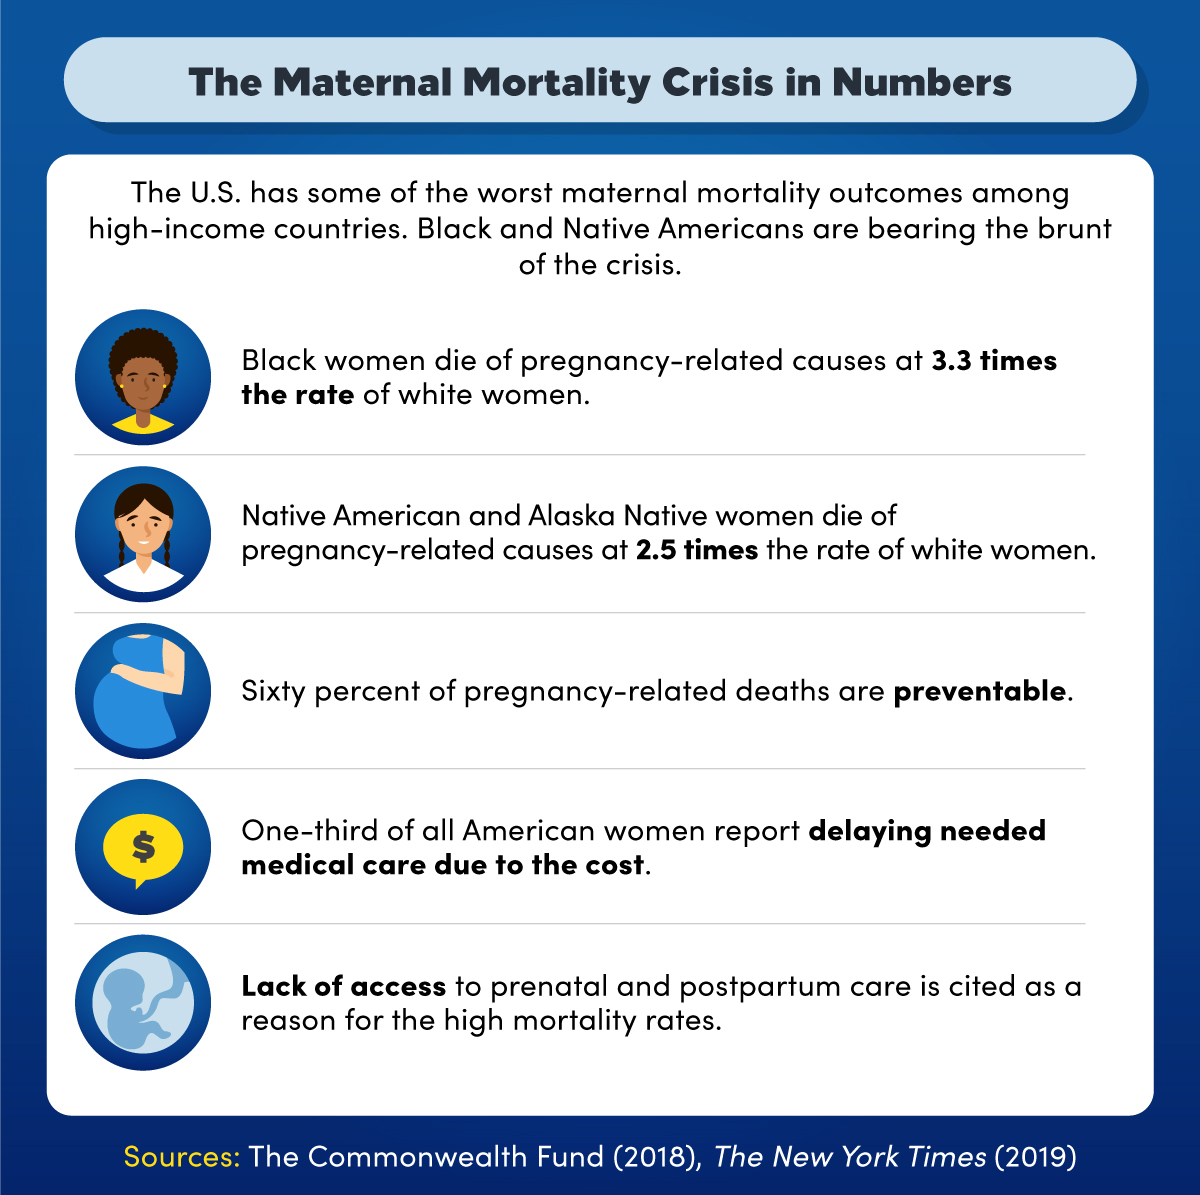 The maternal mortality crisis in numbers.